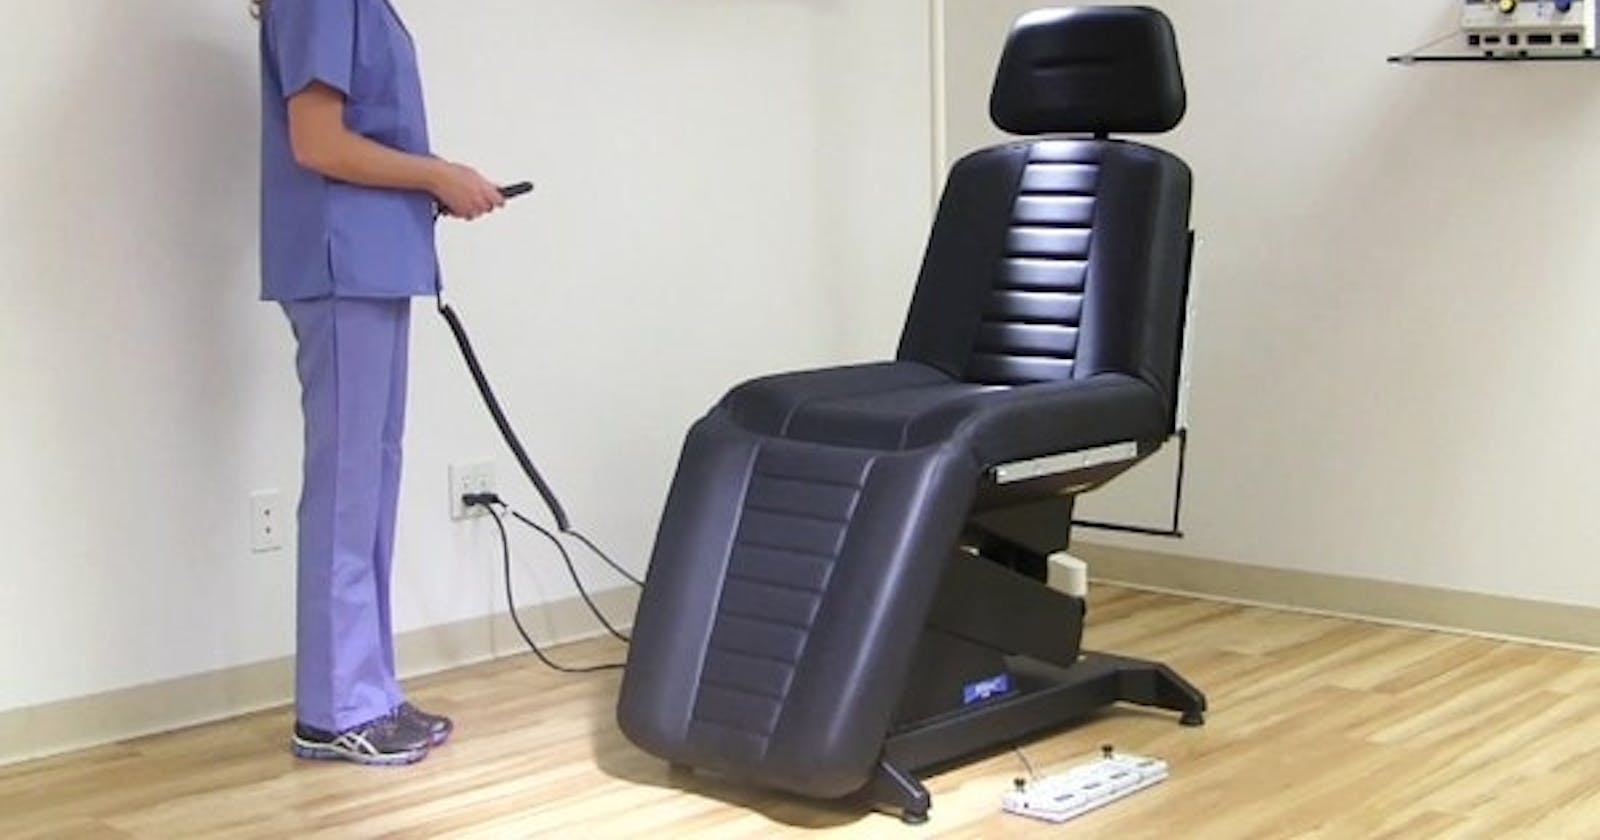 Specialty Medical Chairs Market 2022, Demand, Share And Forecast Report 2027